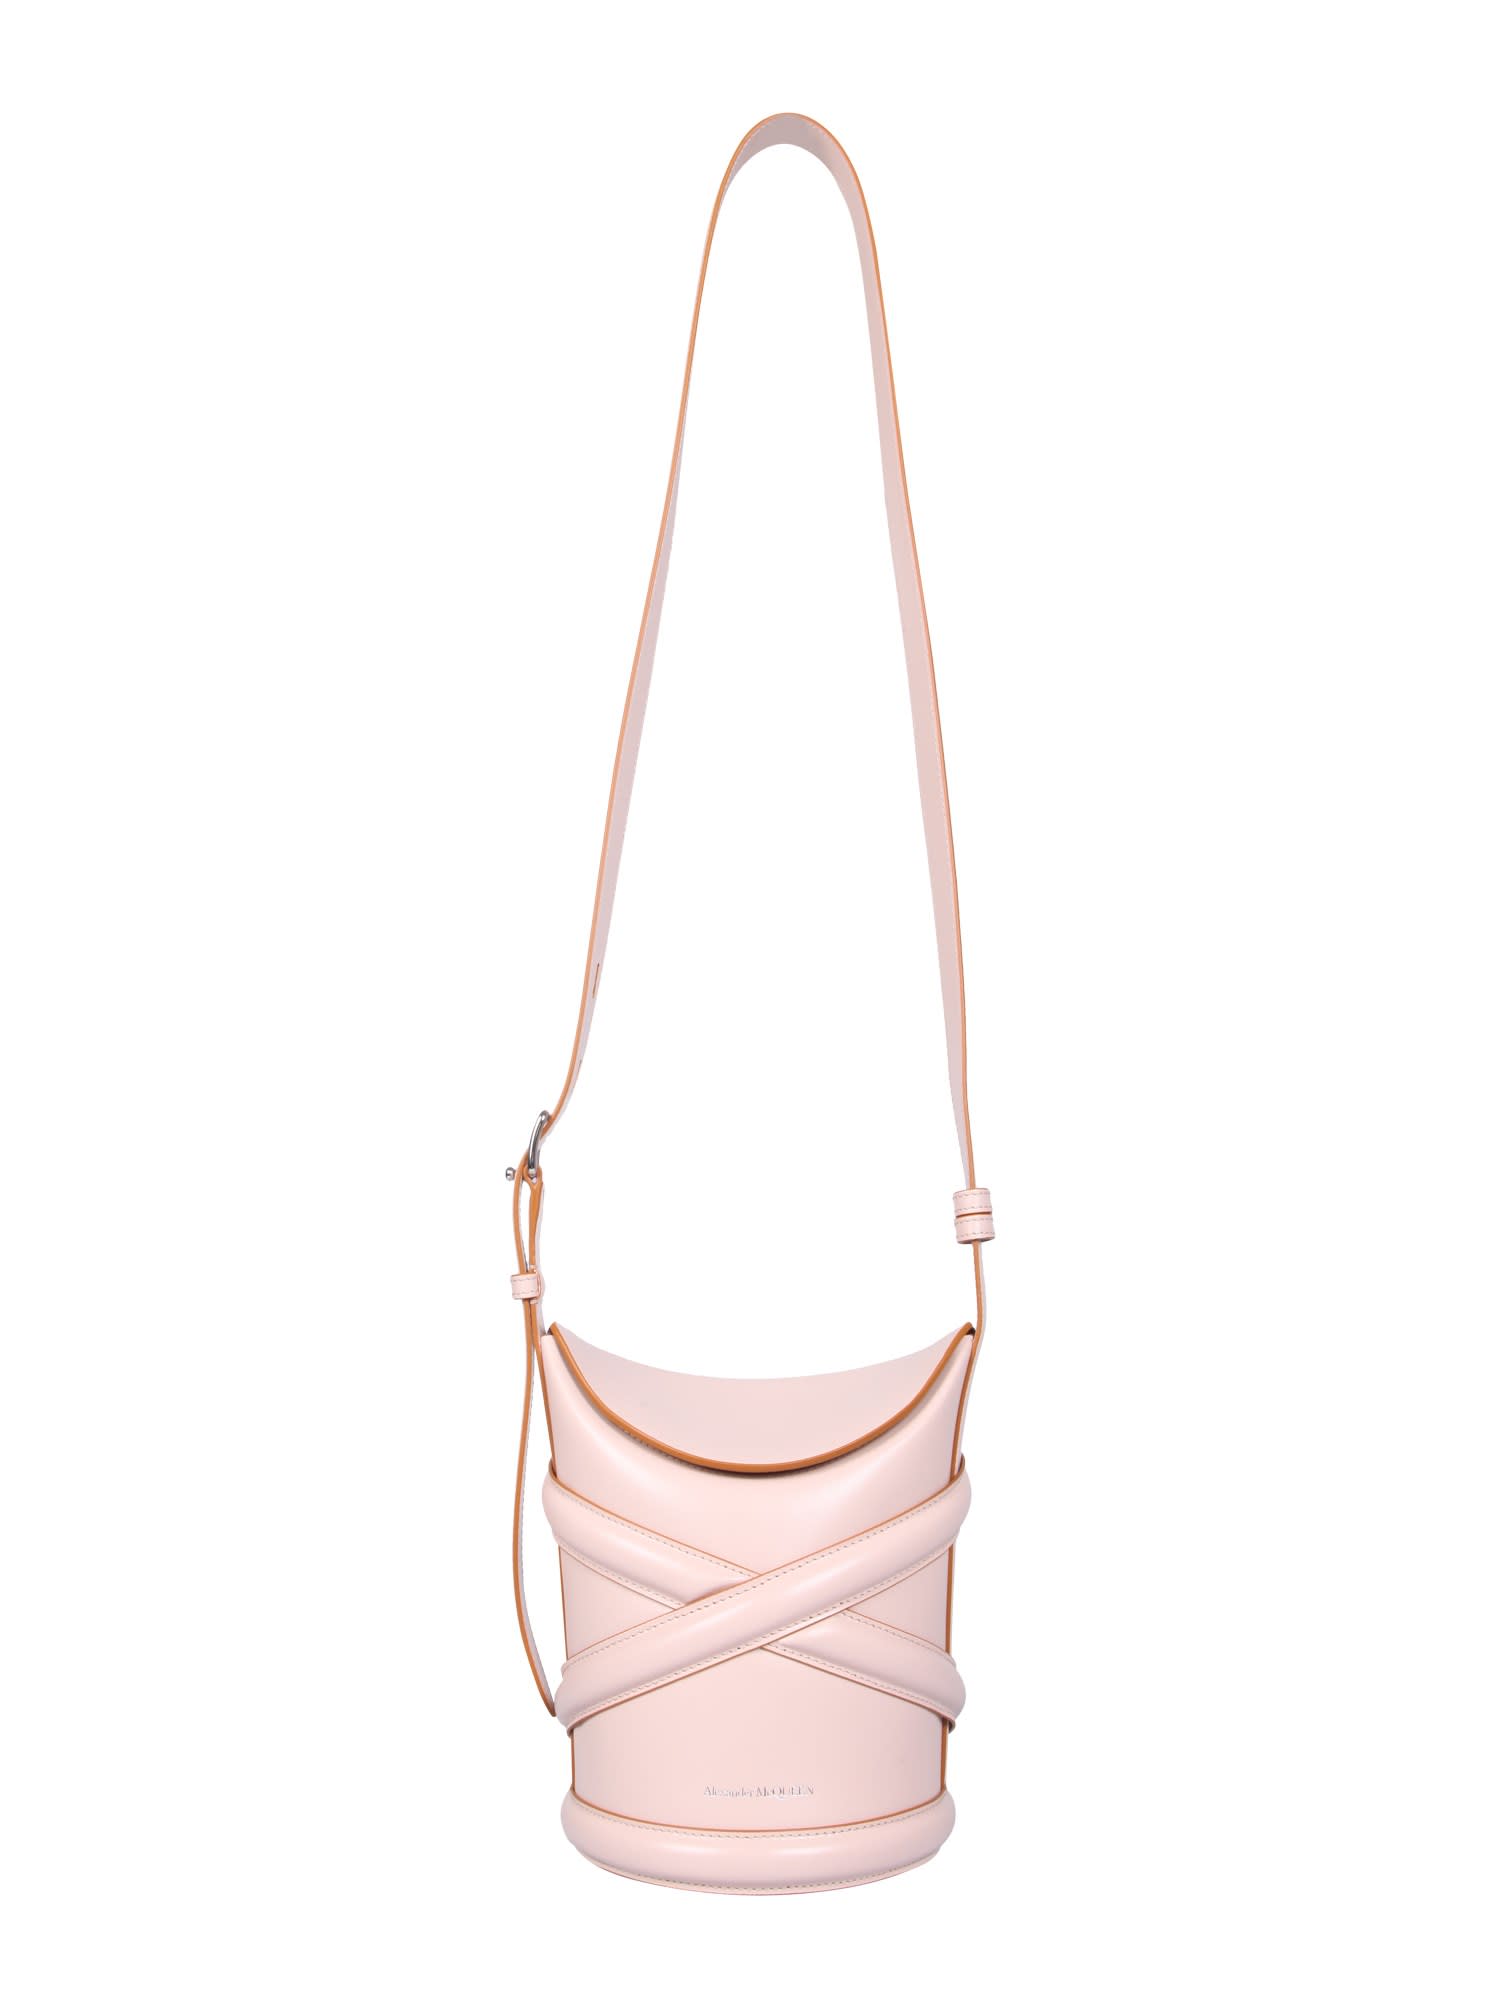 ALEXANDER MCQUEEN SMALL THE CURVE BAG,656467 1YB409900